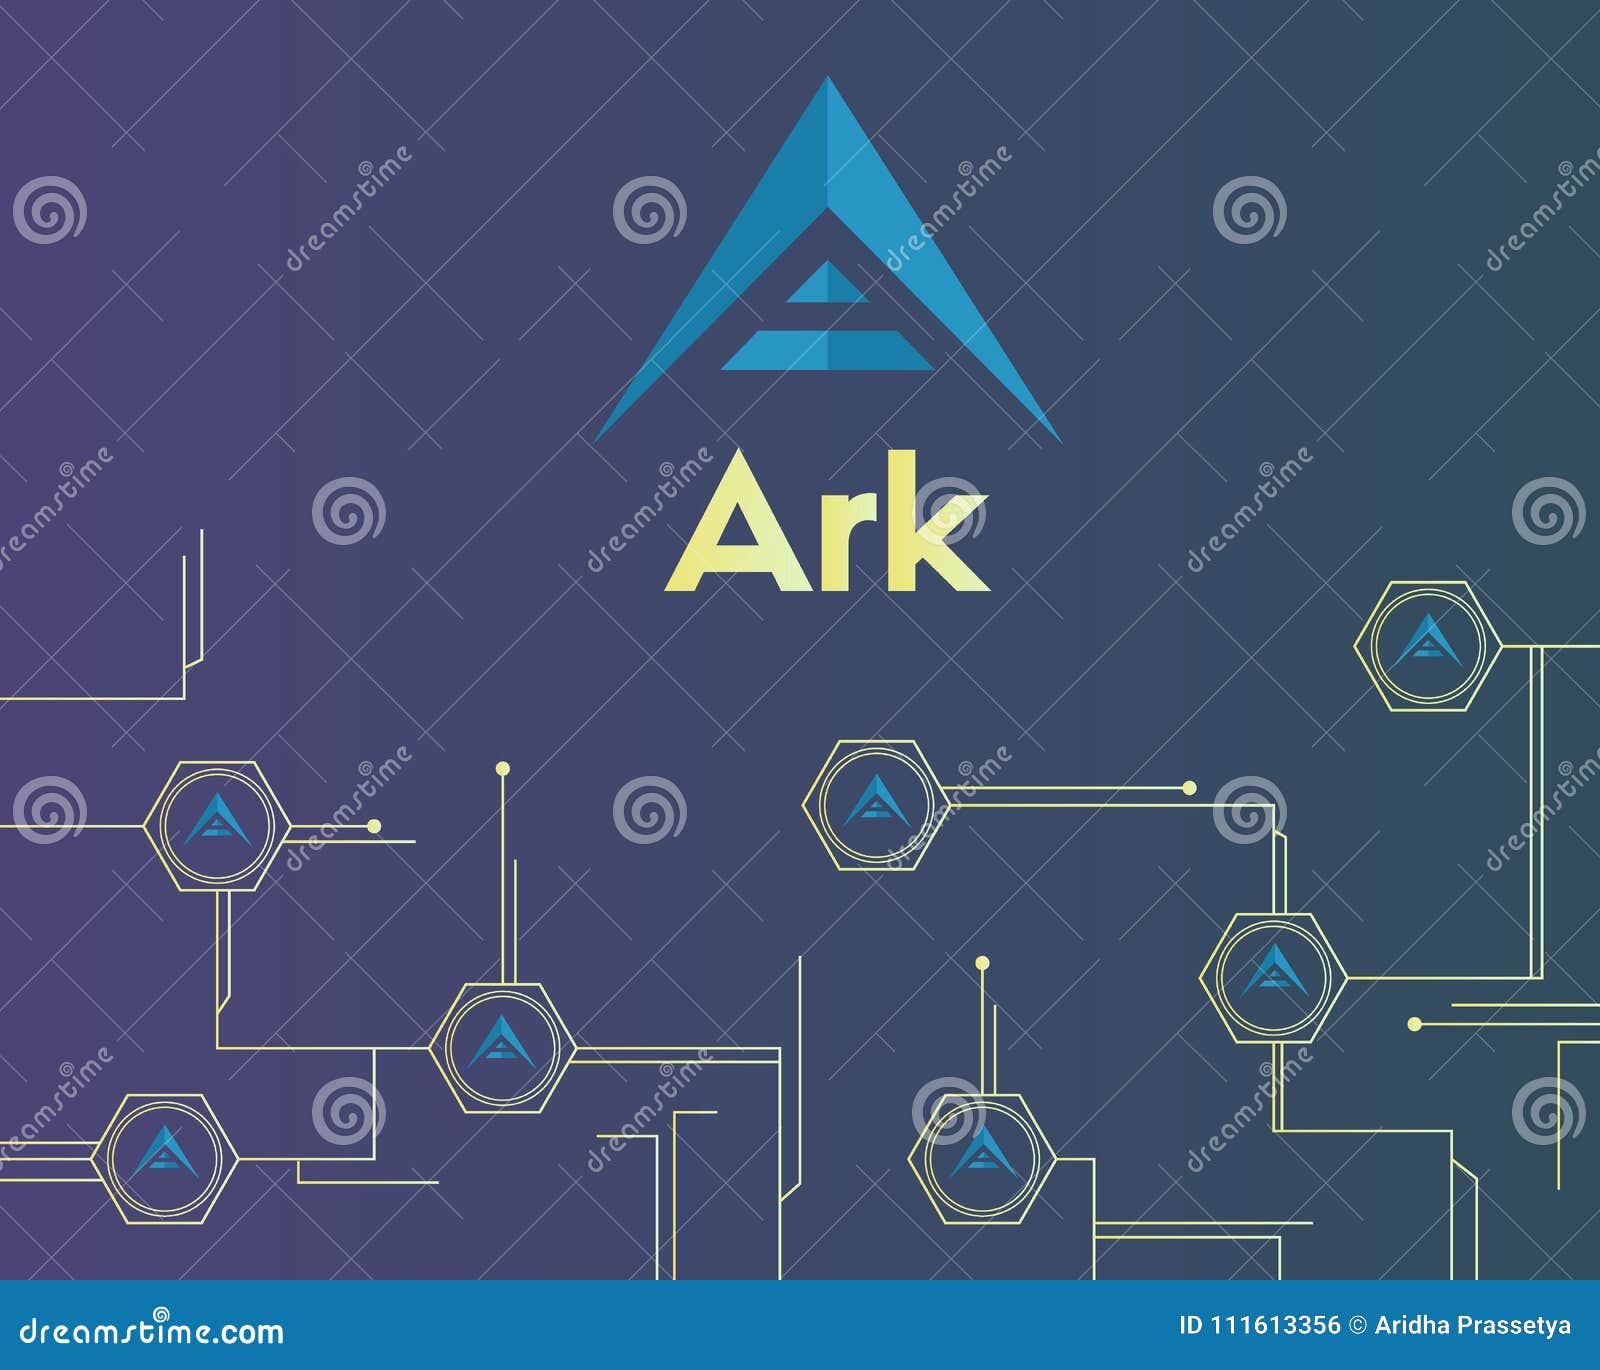 Background Of Ark Cryptocurrency Circuit Theme Stock Vector - Illustration of background ...